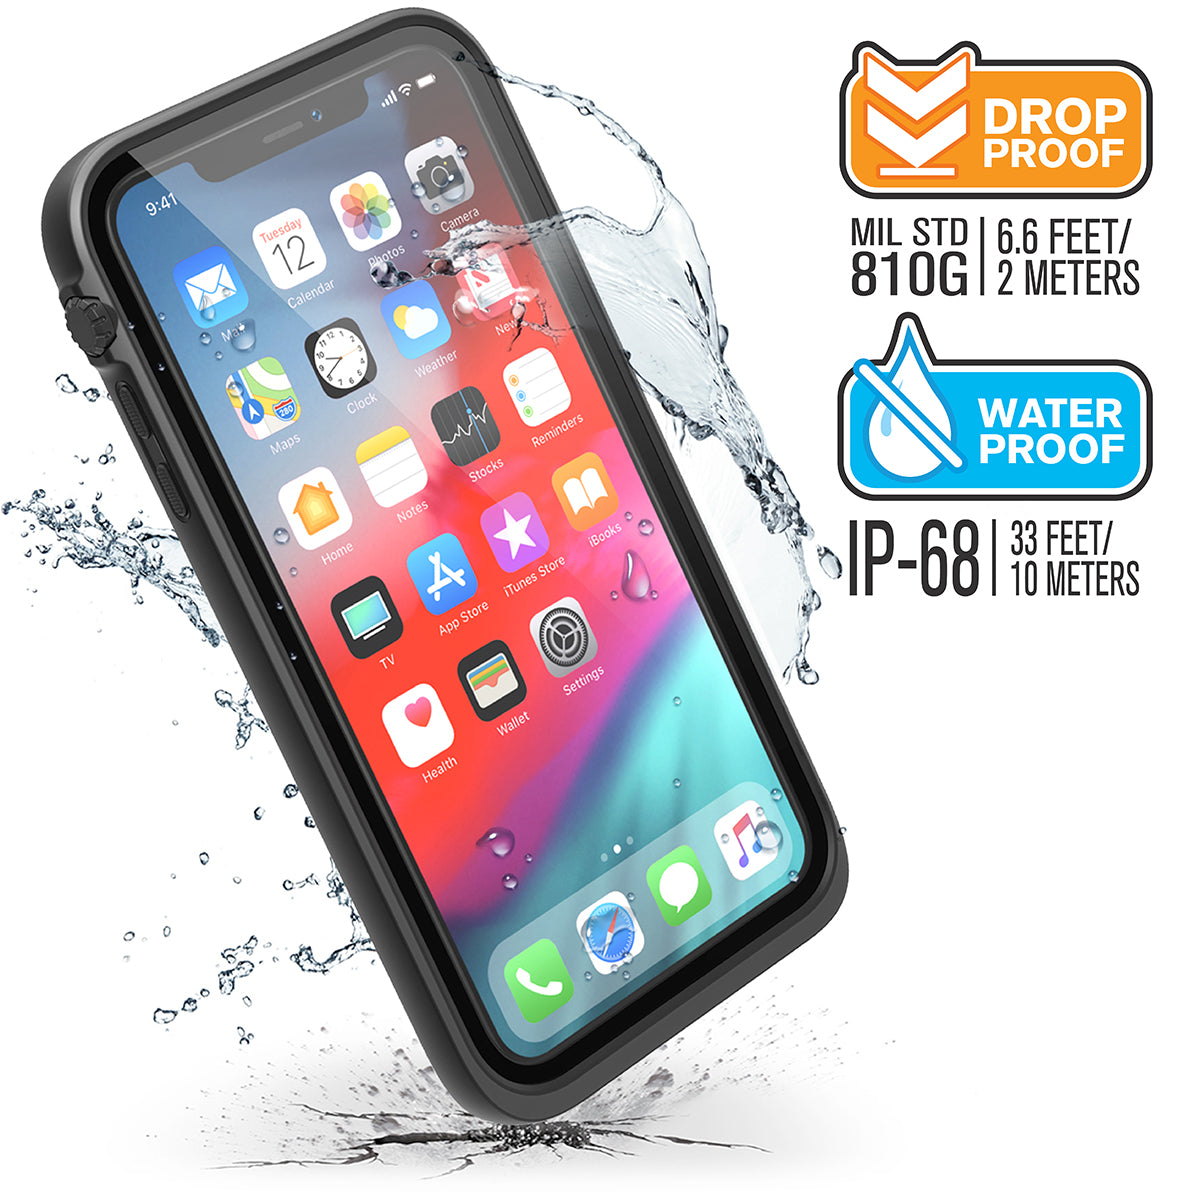 Catalyst iphone x/xr/xs/xs max  waterproof case xs showing-how-drop-proof-and-water-proof-the-case-is-in stealth-black black text reads drop proof MIL STD 810G 6.6 FEET 2 METERS WATER PROOF IP-68 33 FEET 10 METERS